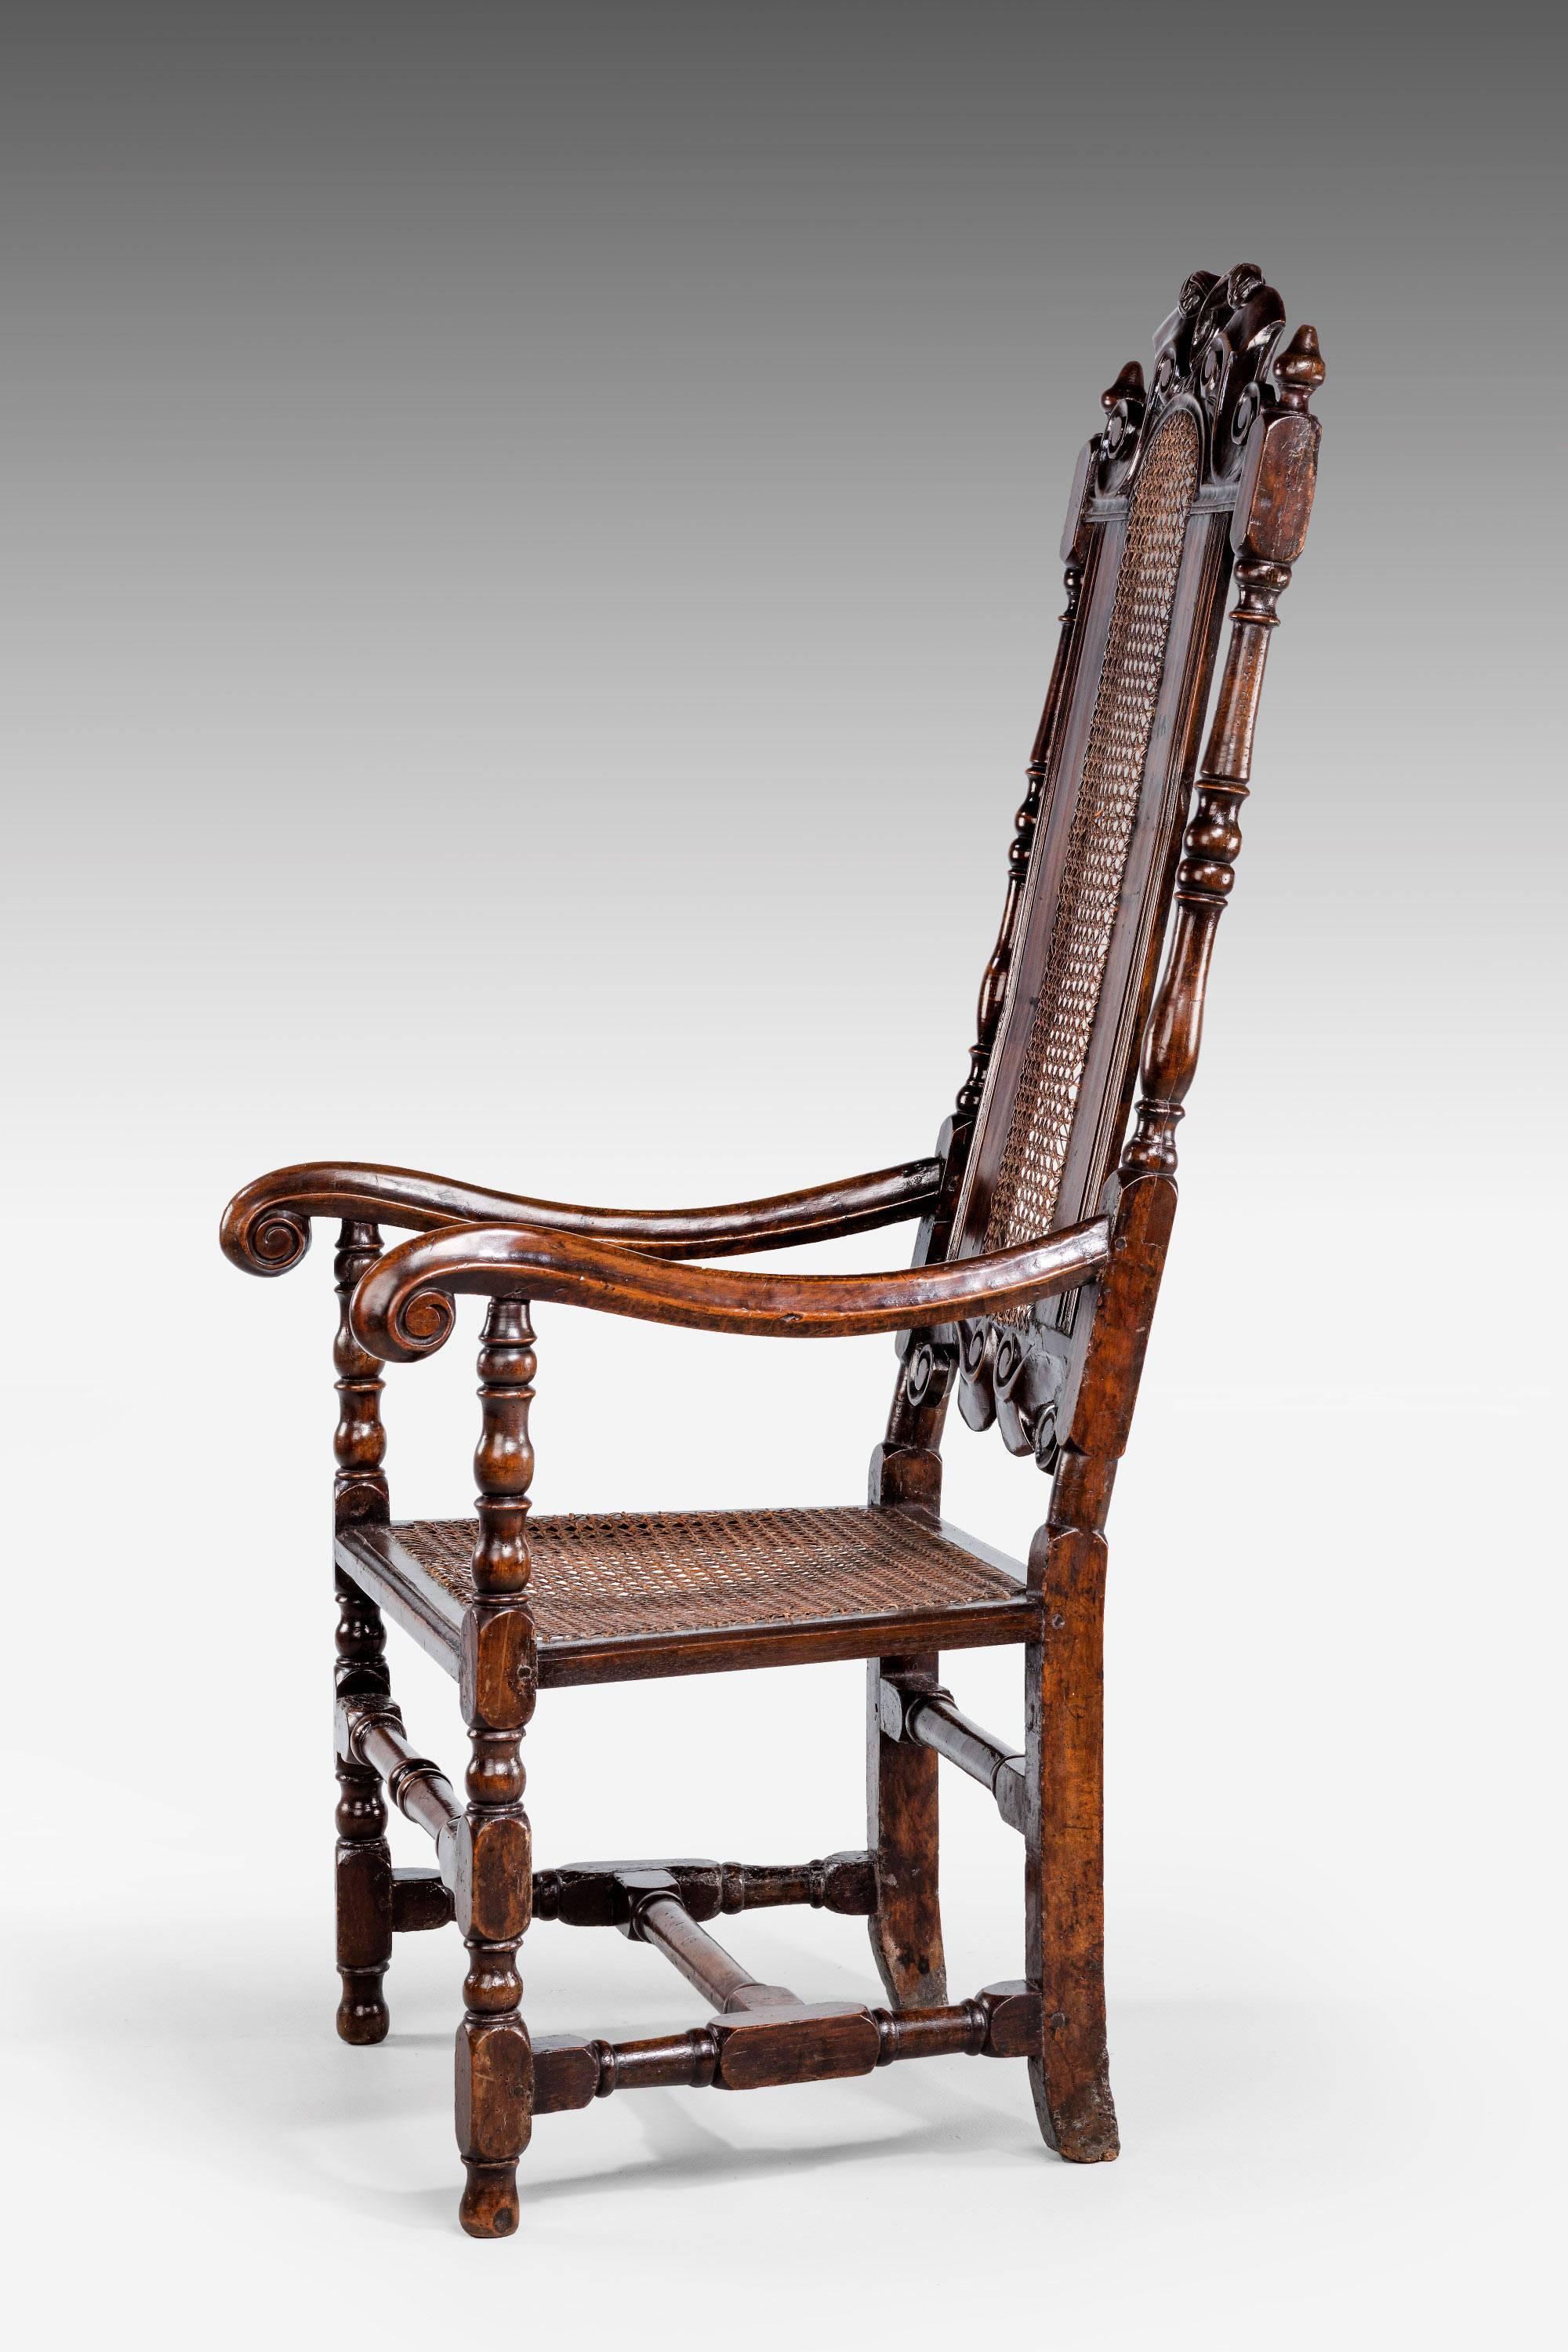 17th century chairs styles